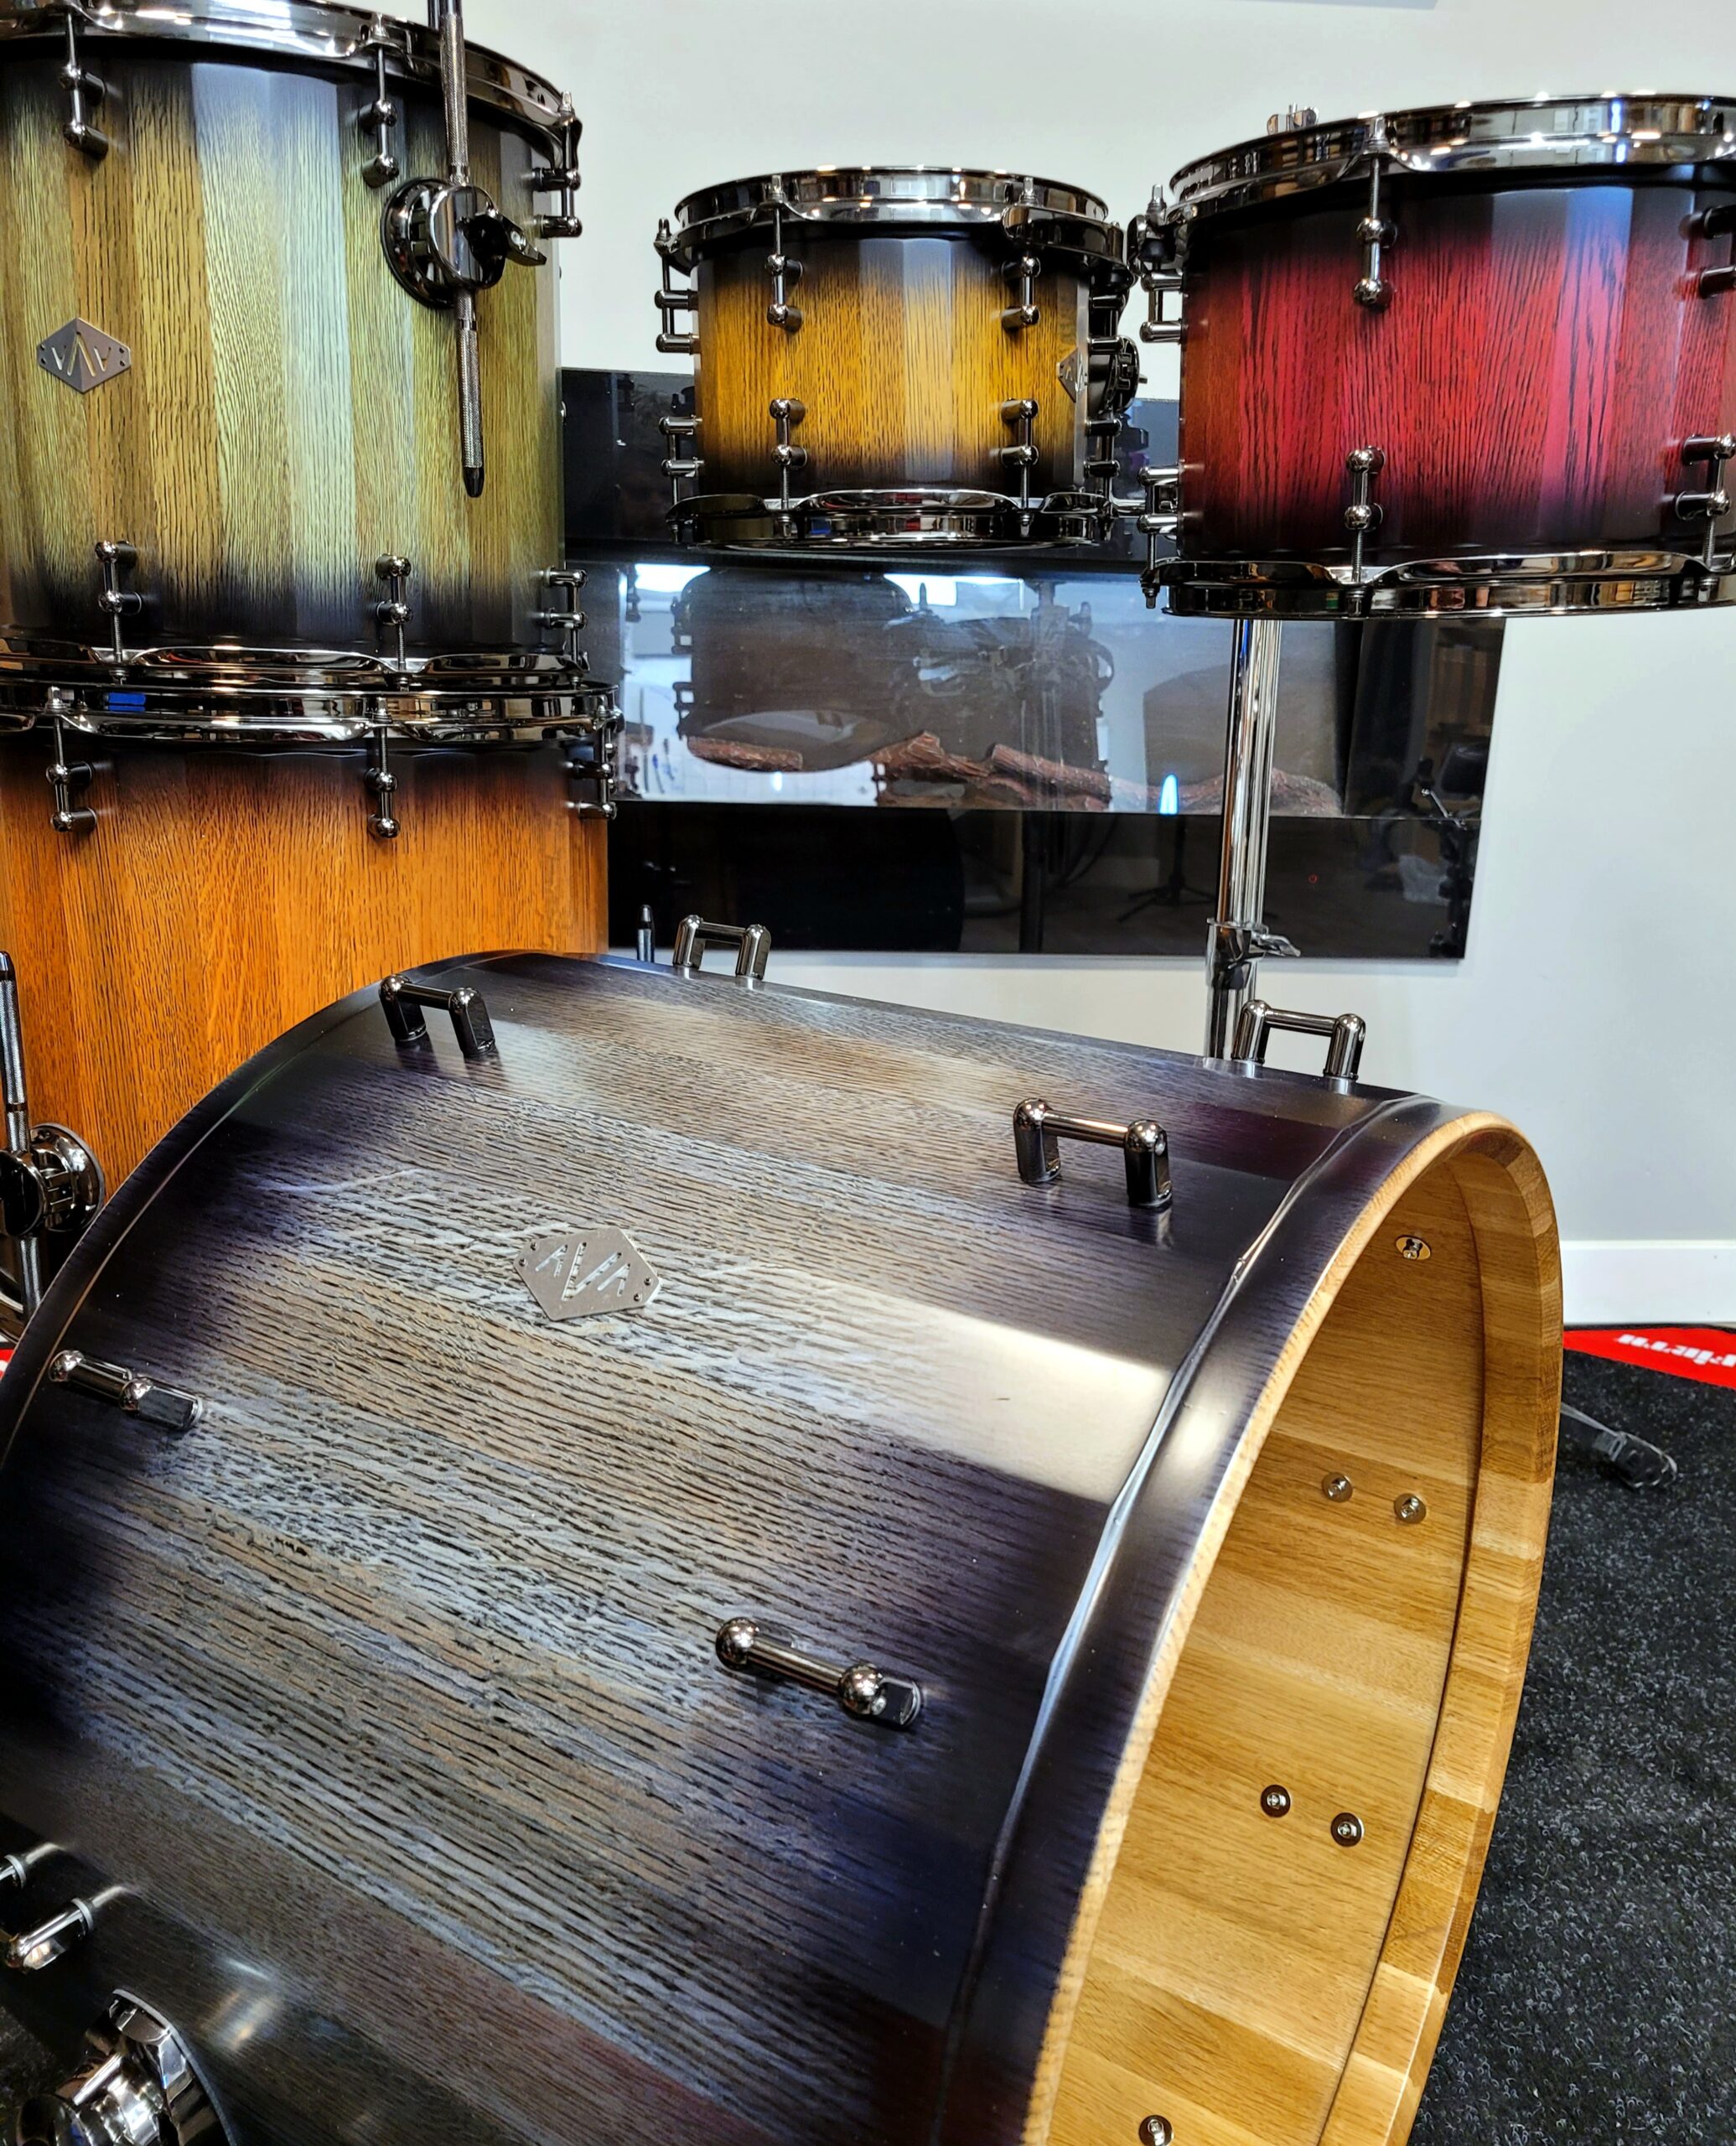 – Precision made snare drums!